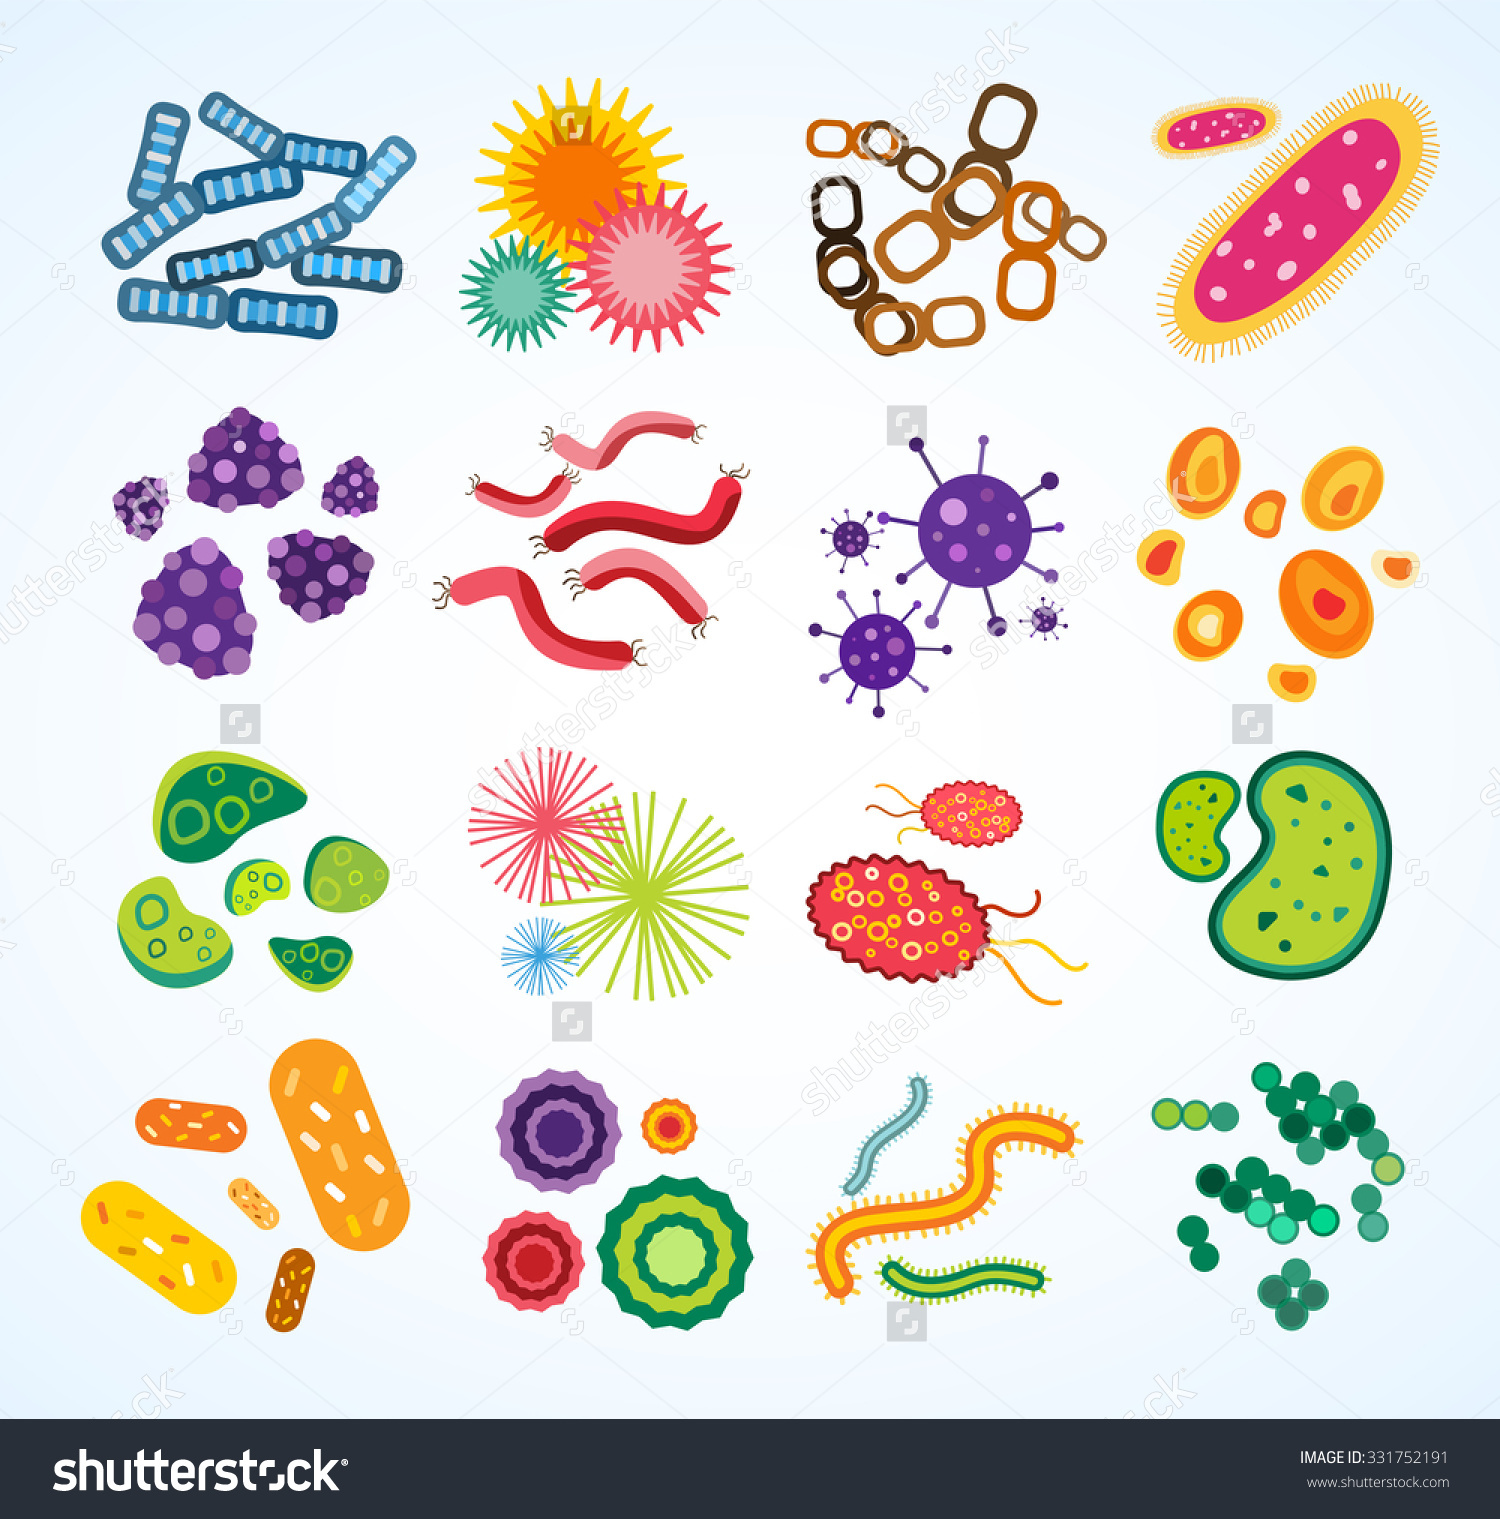 Germs and . Bacteria clipart fungus bacteria